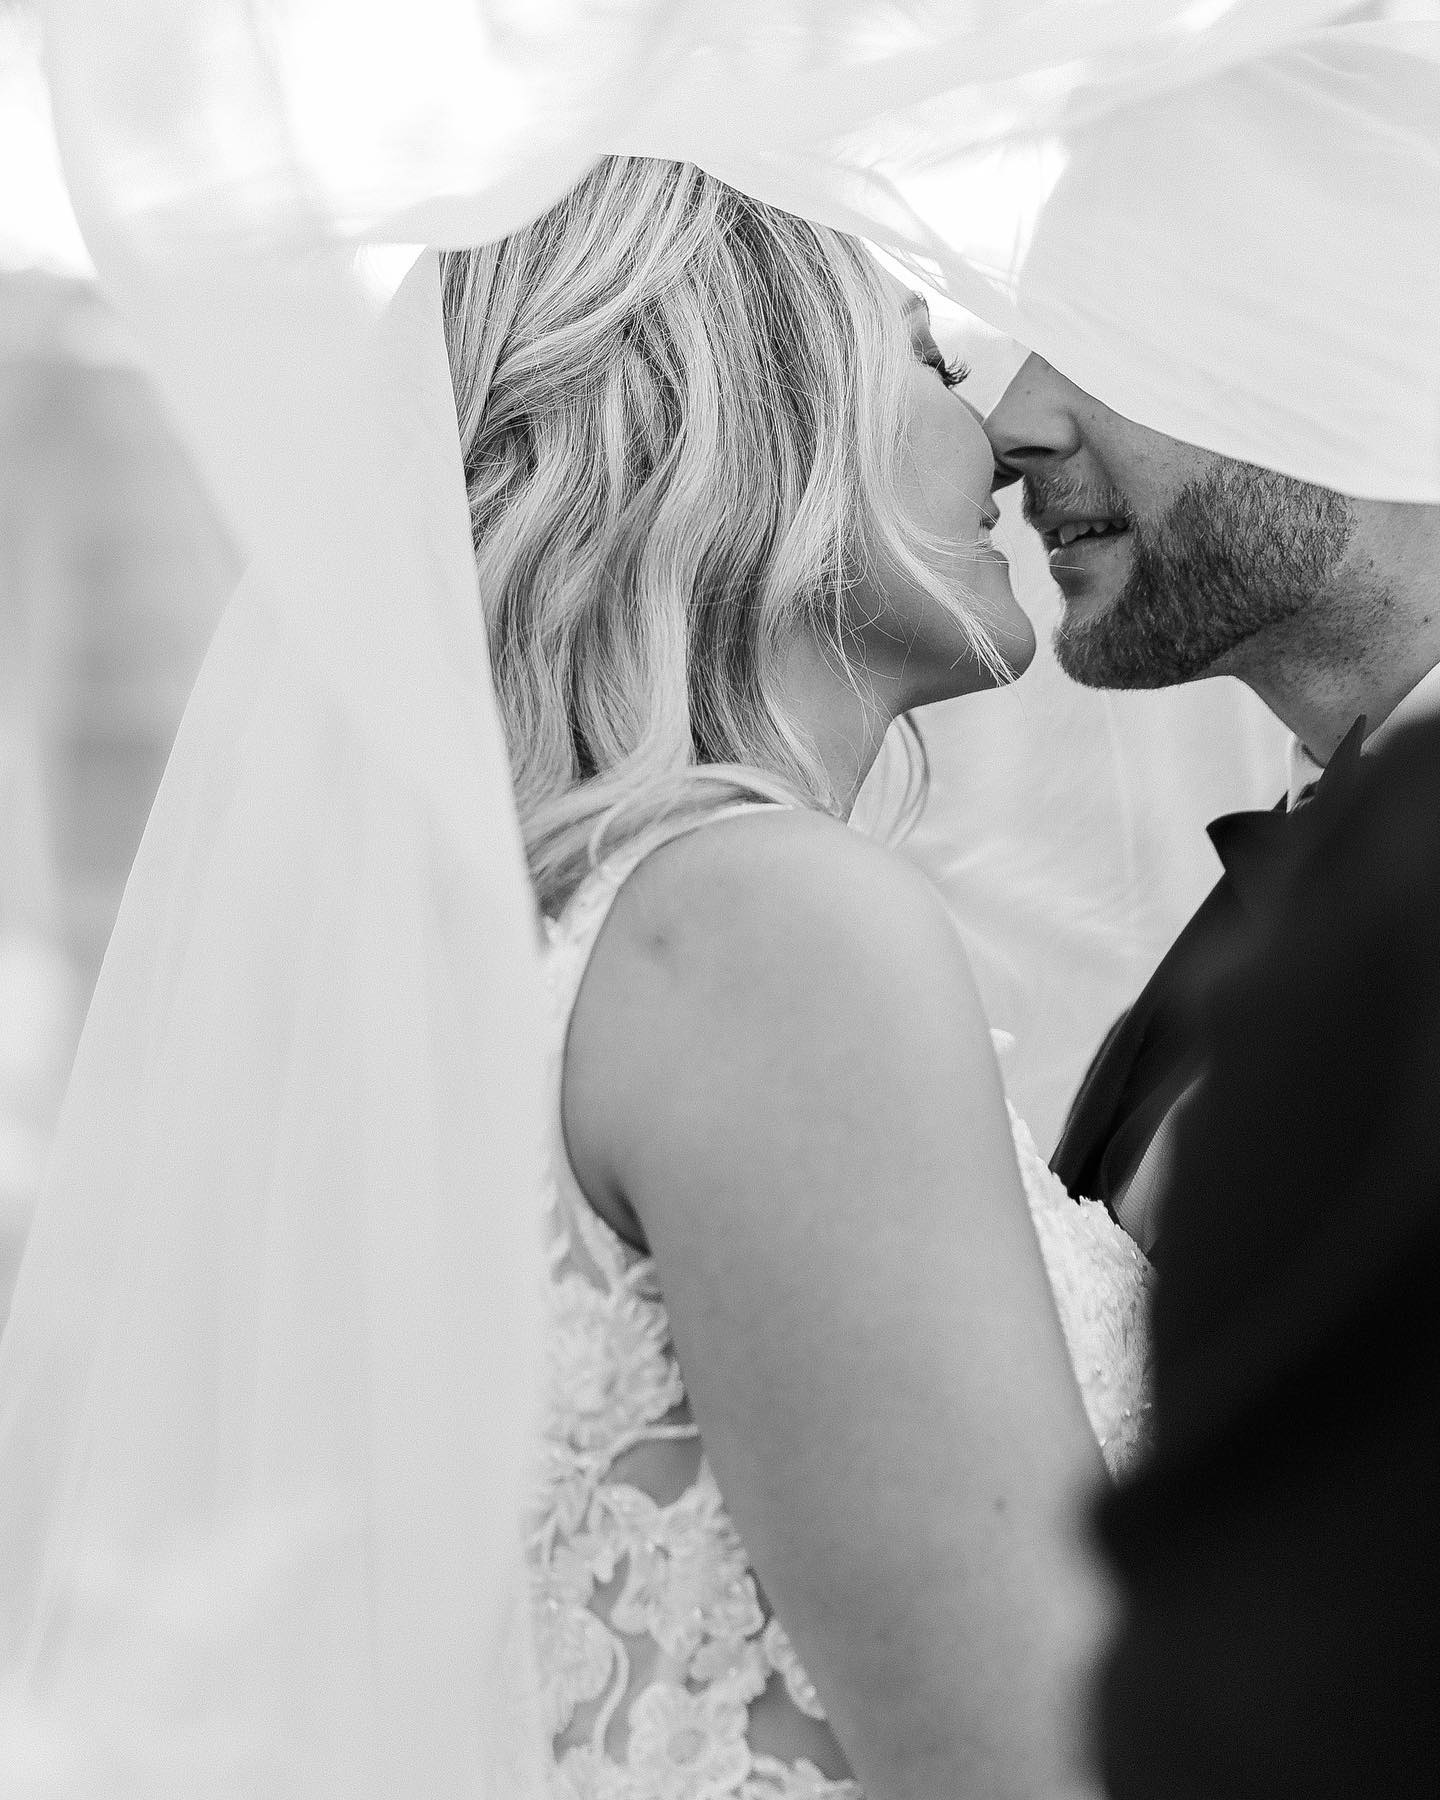 a couple sharing an intimate moment under the wedding veil in their wedding attire